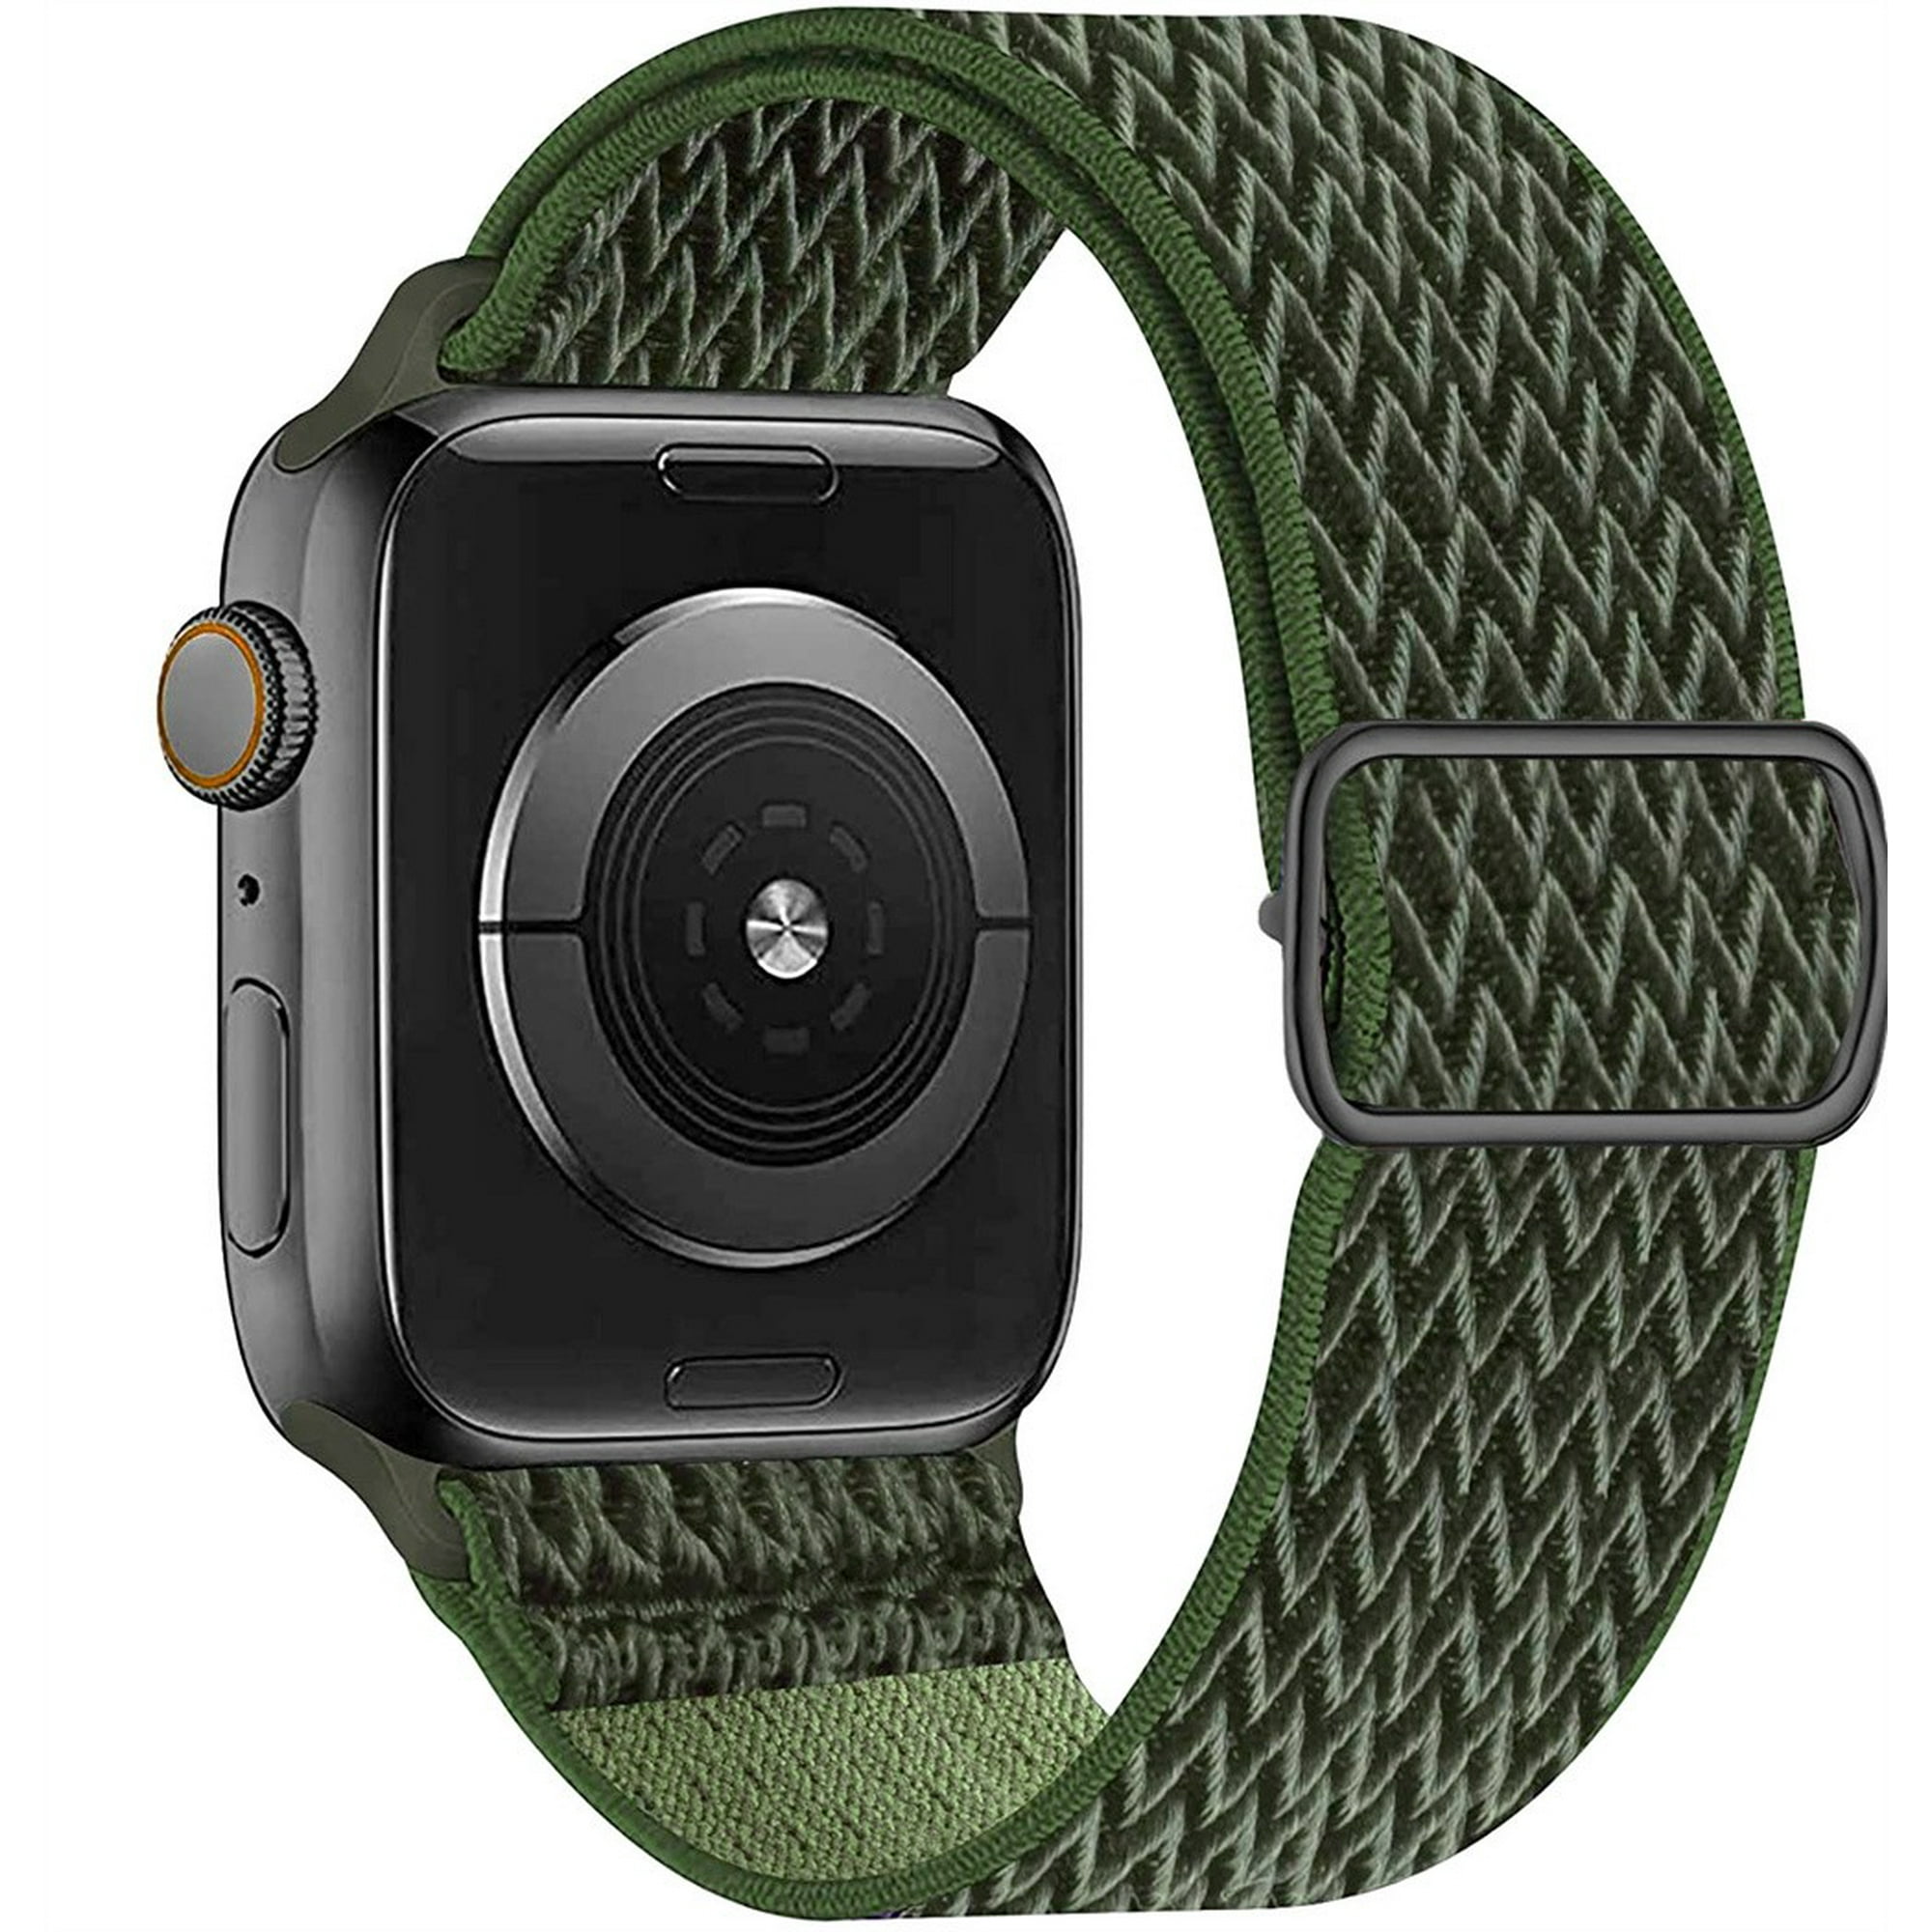 Good Apple Watch Bands, Stretchy, Washable